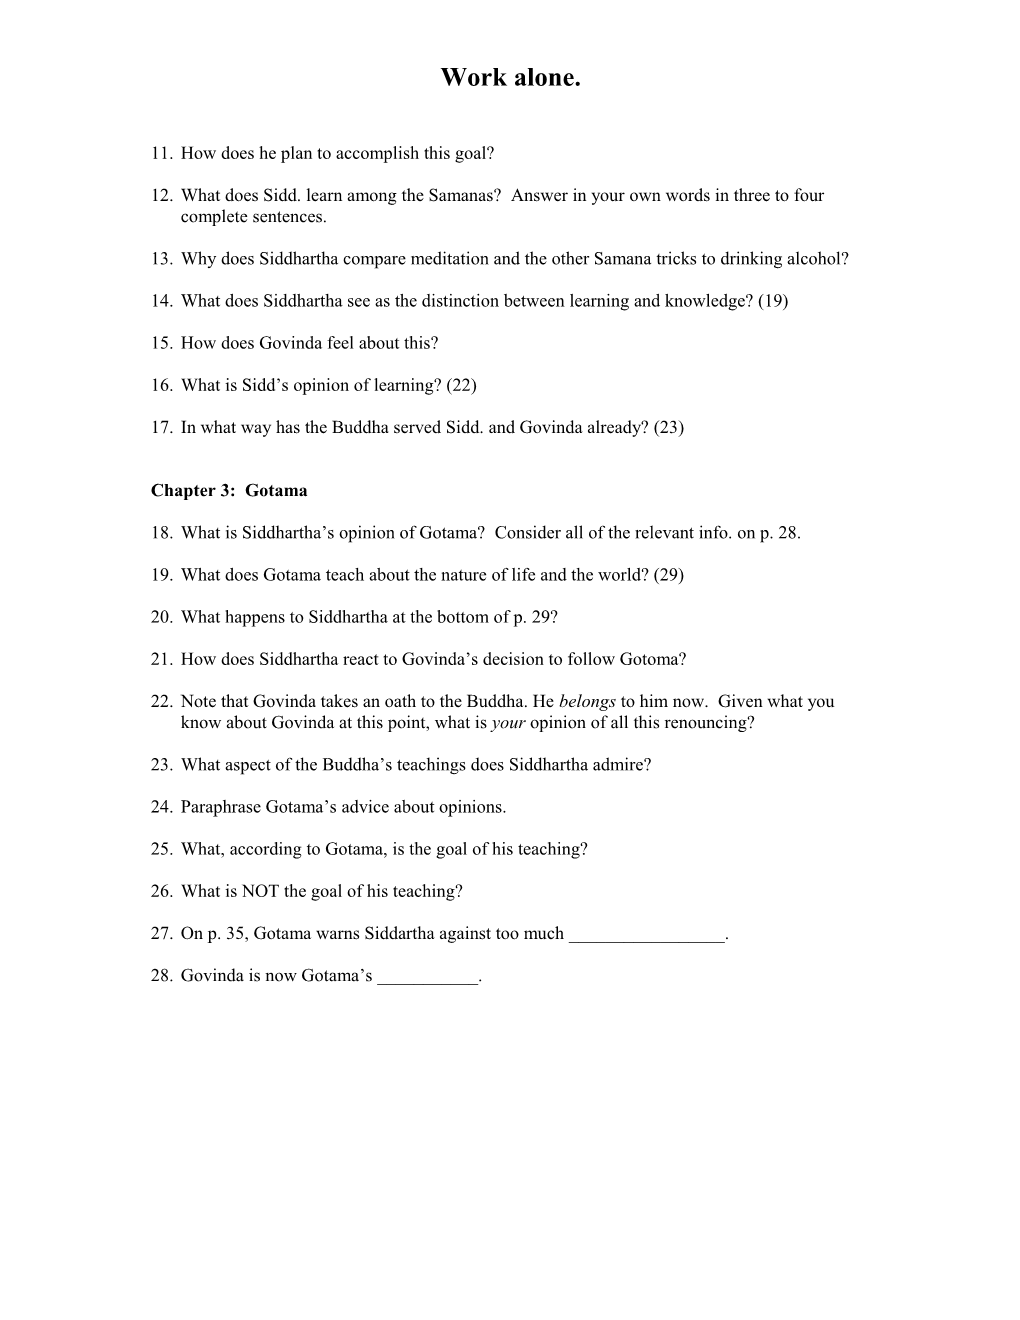 Guided Reading Questions for Siddhartha, Chapters 1-3